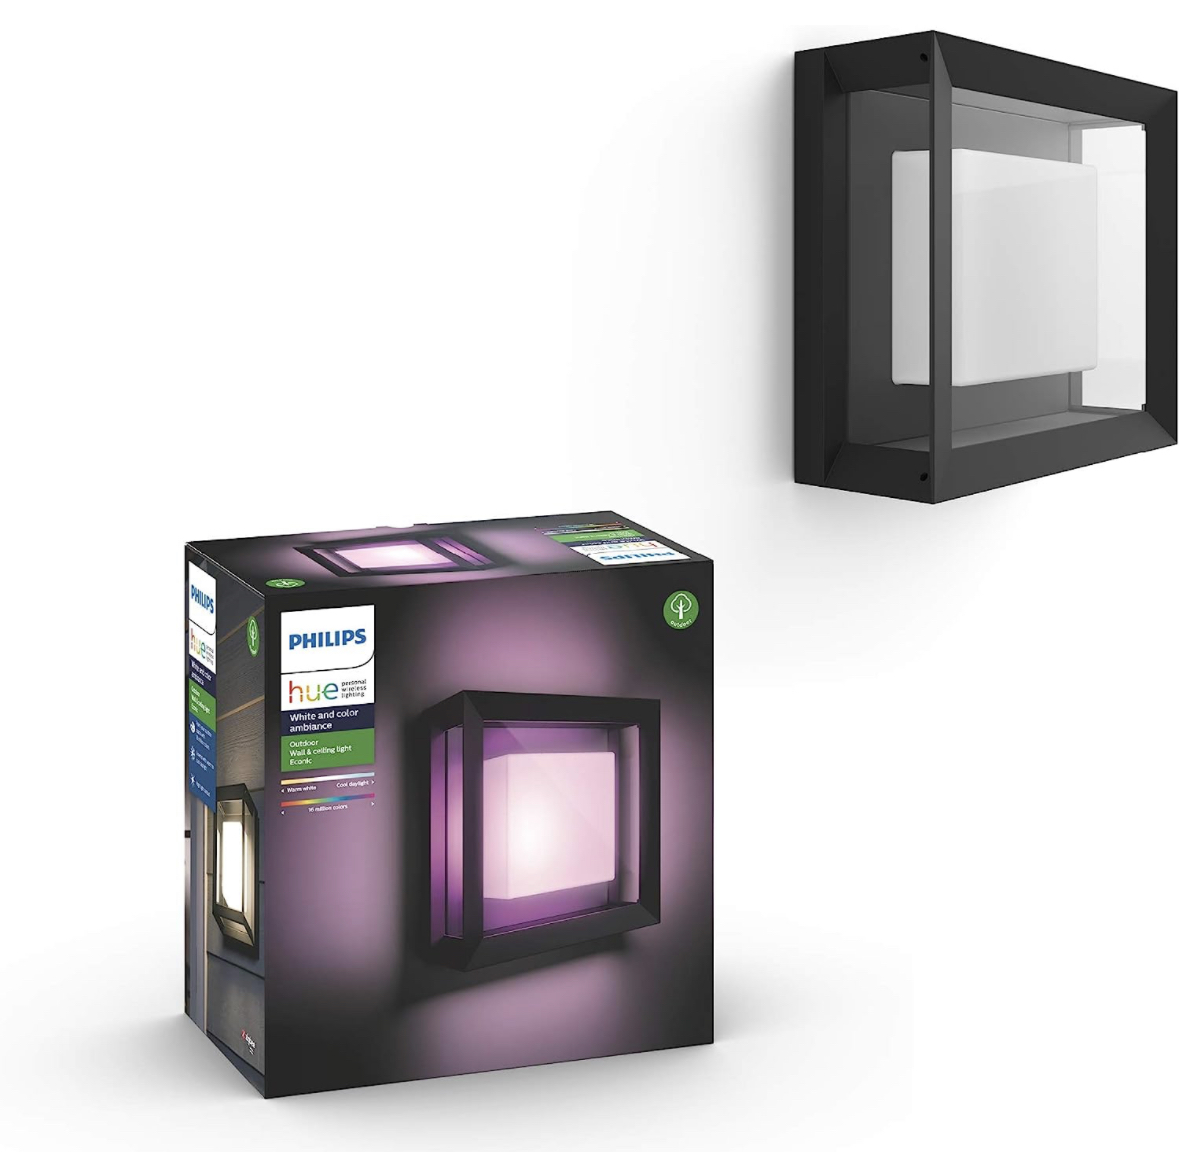 Philips Hue White and Color Ambiance Econic Square Outdoor Wall and Ceiling Light Fixture - $117.50 @ Amazon